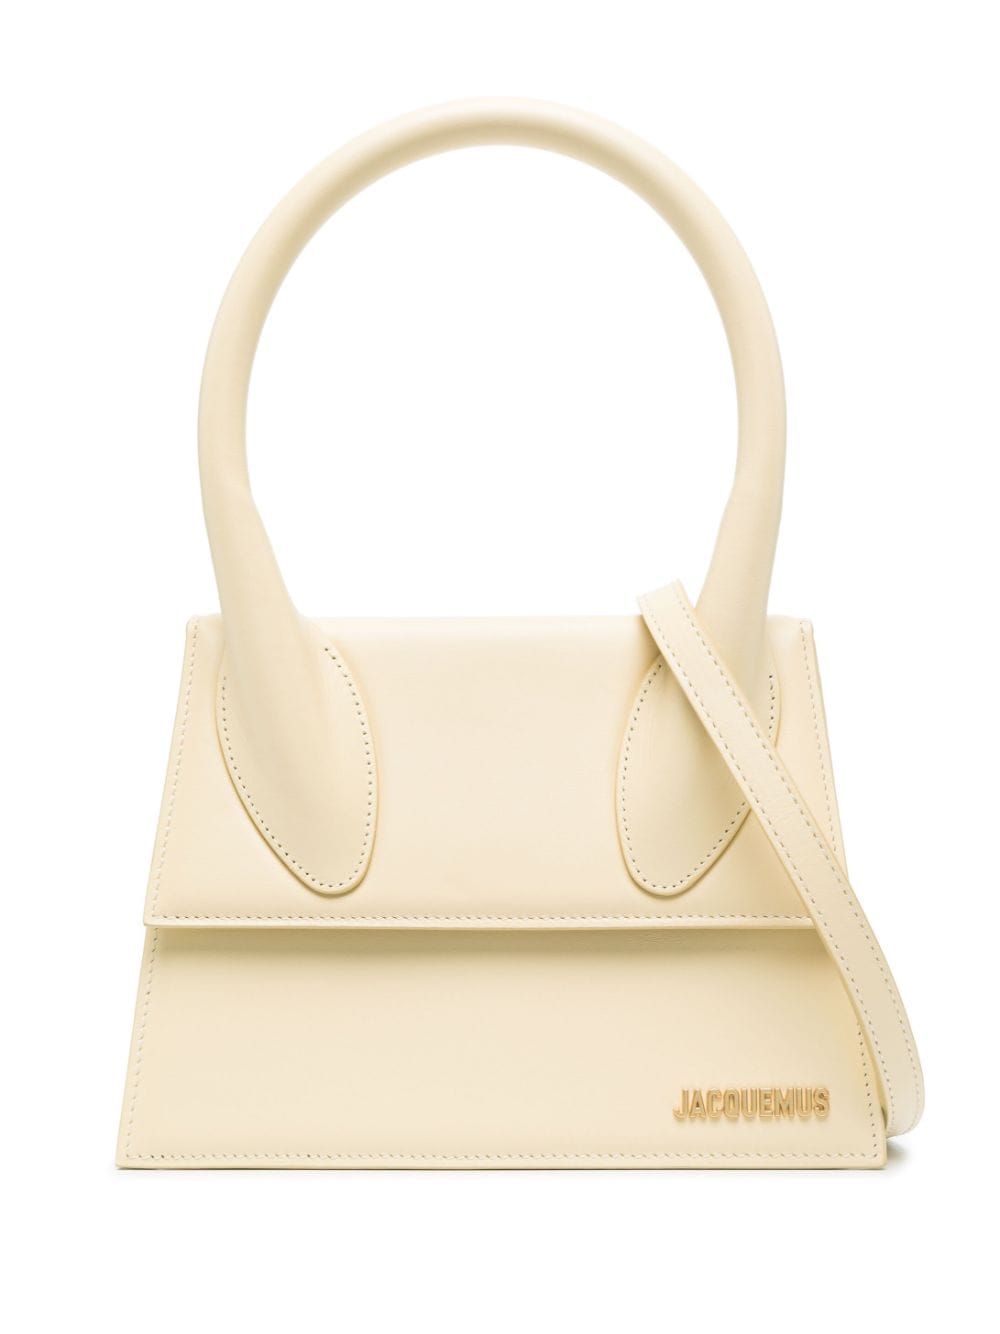 JACQUEMUS Ivory White Leather Tote Handbag with Gold-Tone Logo and Detachable Strap